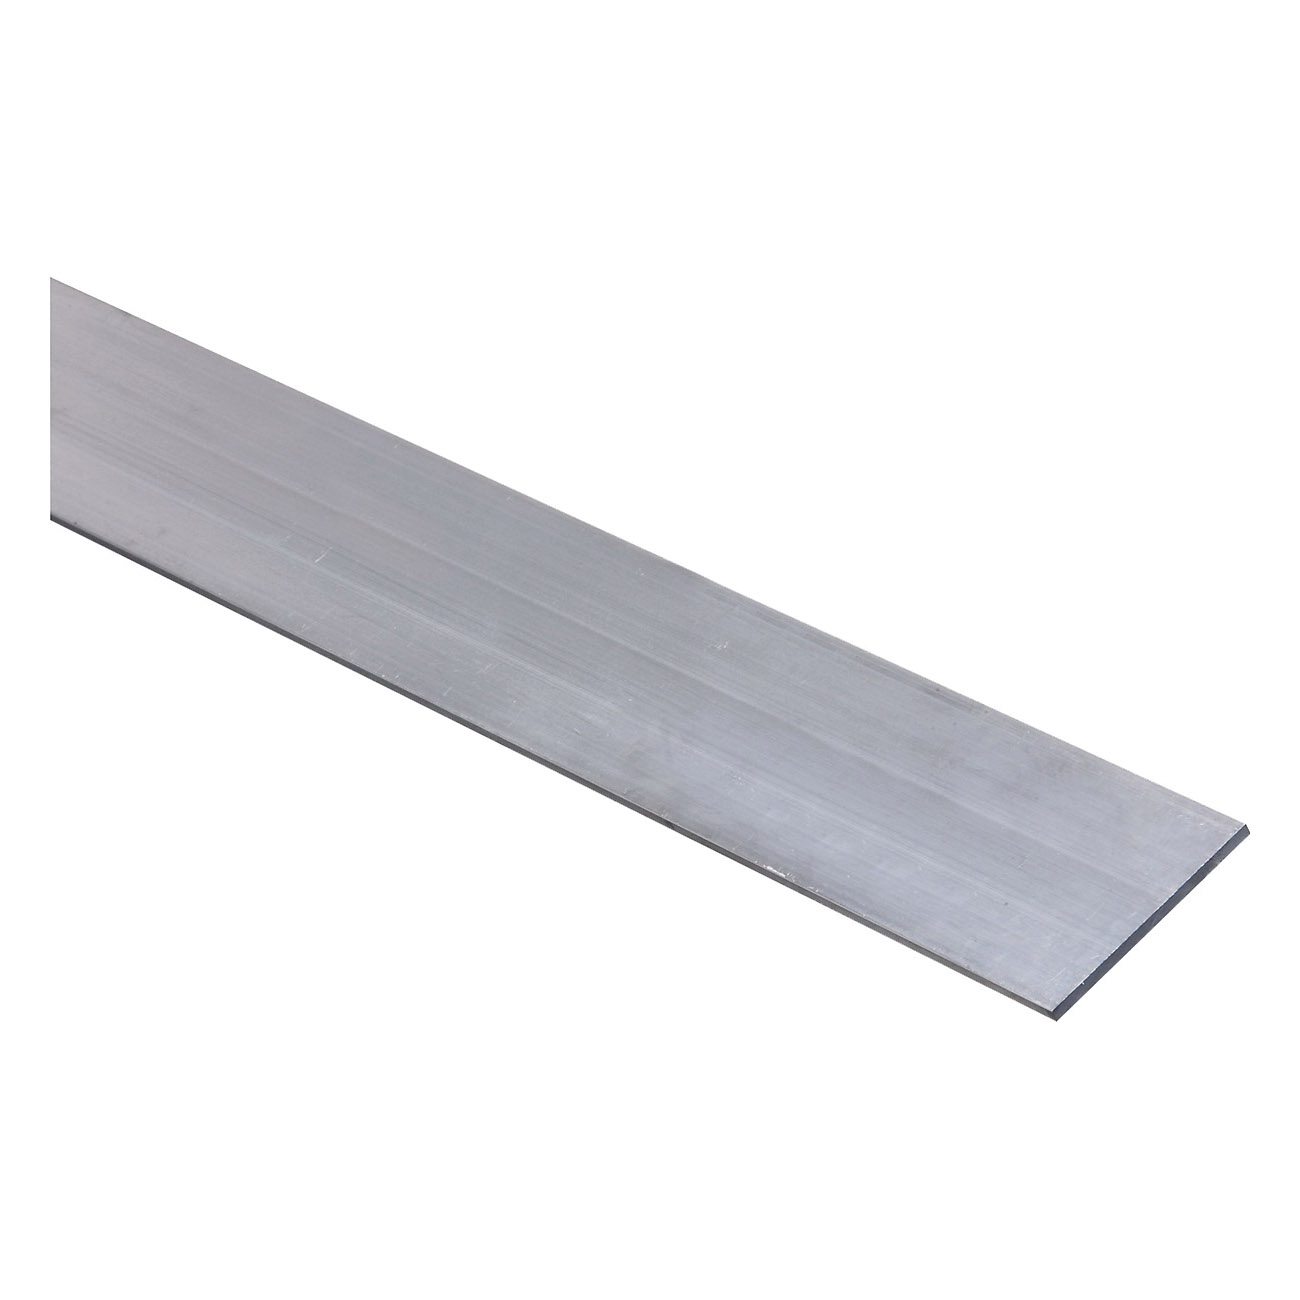 4200BC Series N247-130 Flat Bar, 2 in W, 48 in L, 1/8 in Thick, Aluminum, Mill